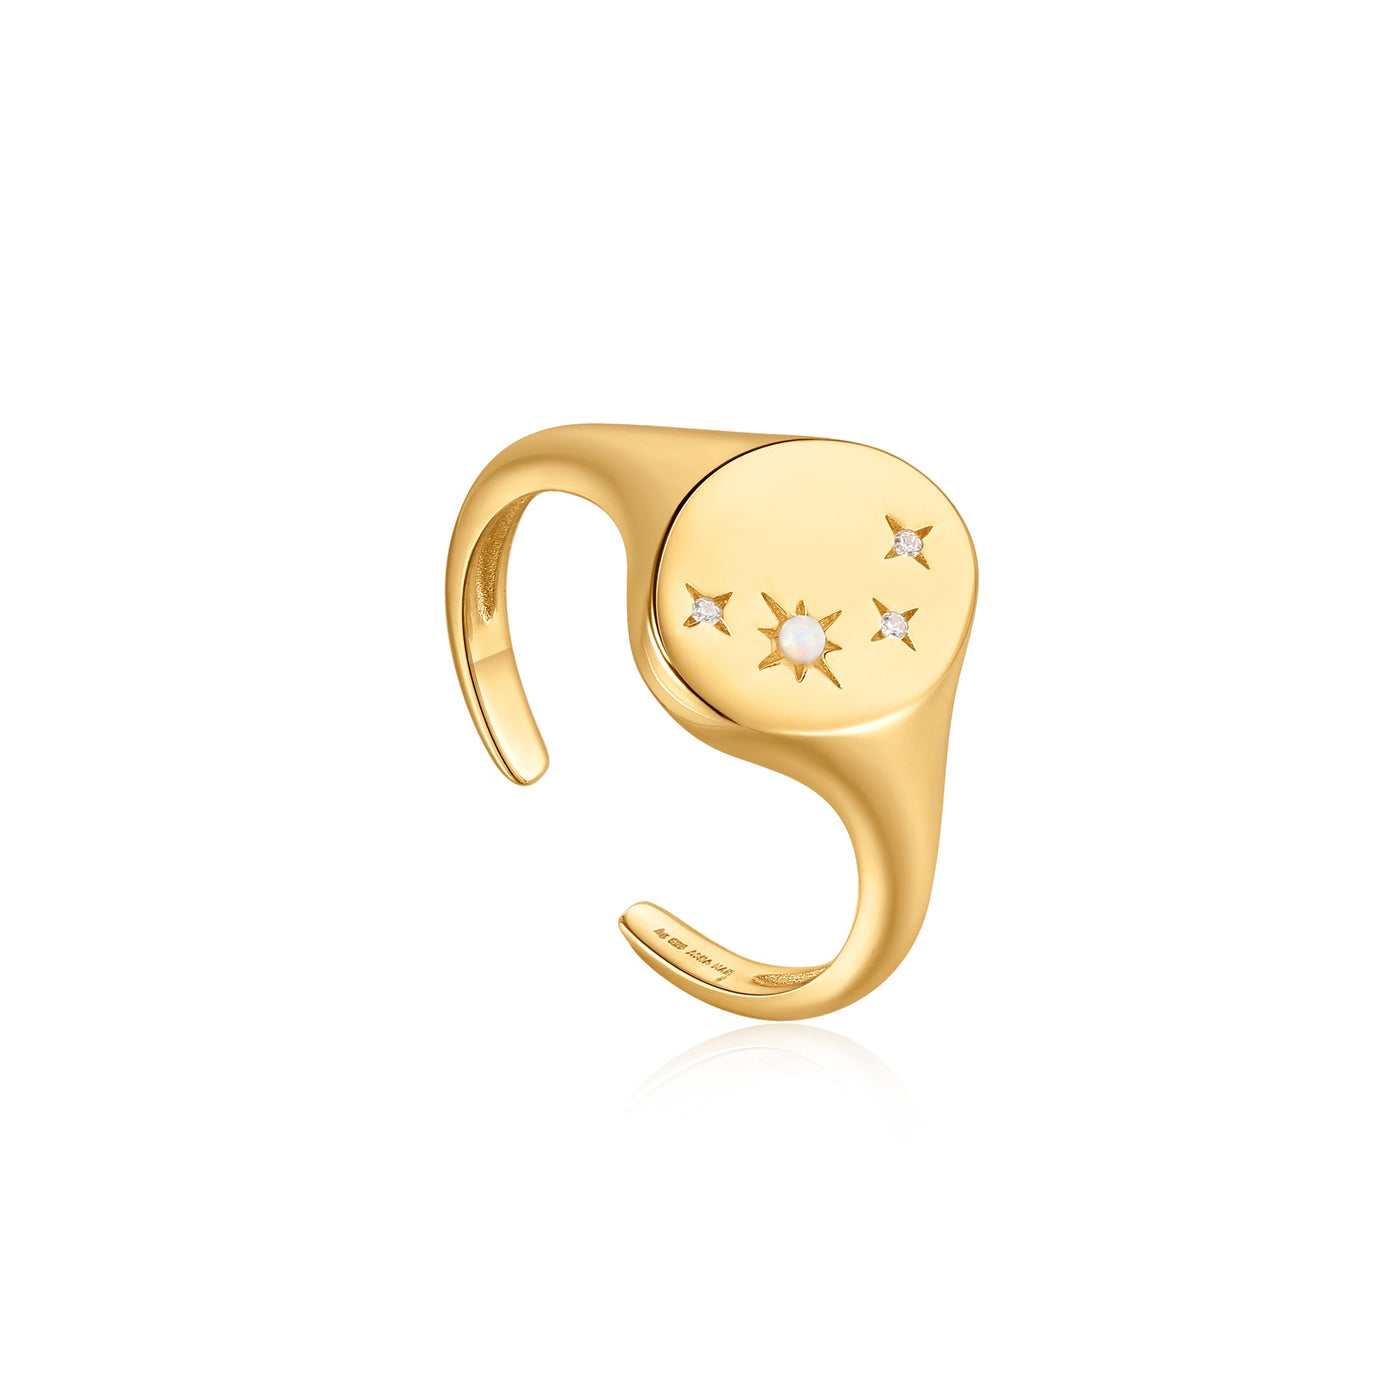 Rising Star - Gold Starry Opal Adjustable Signet Ring